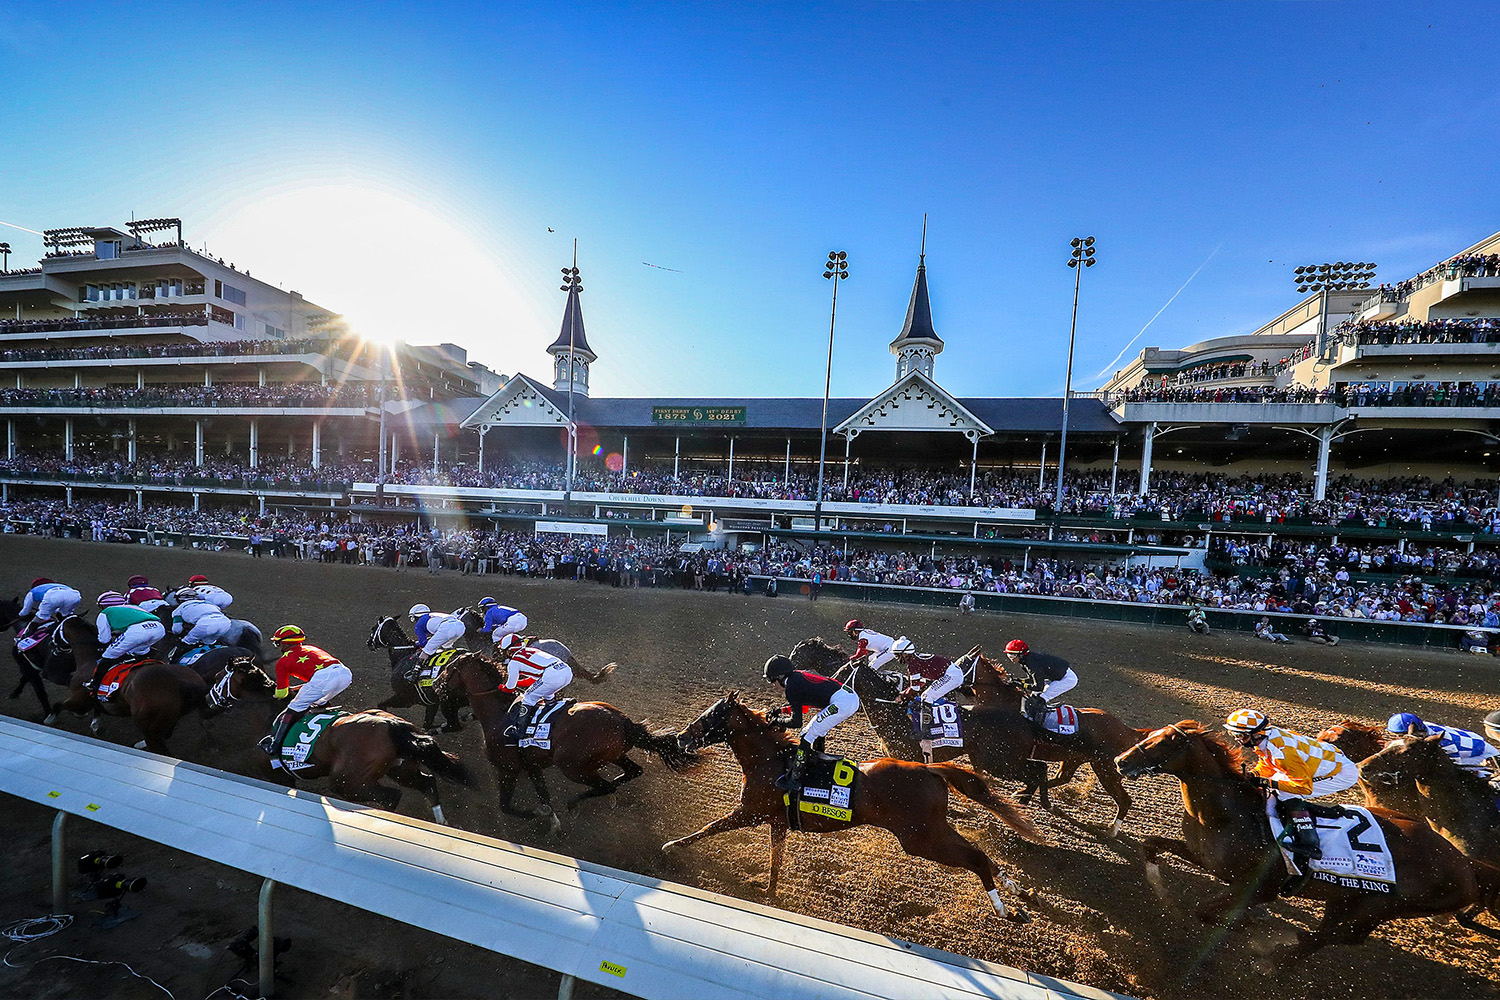 This year's four scratches are the most since the 2015 Kentucky Derby